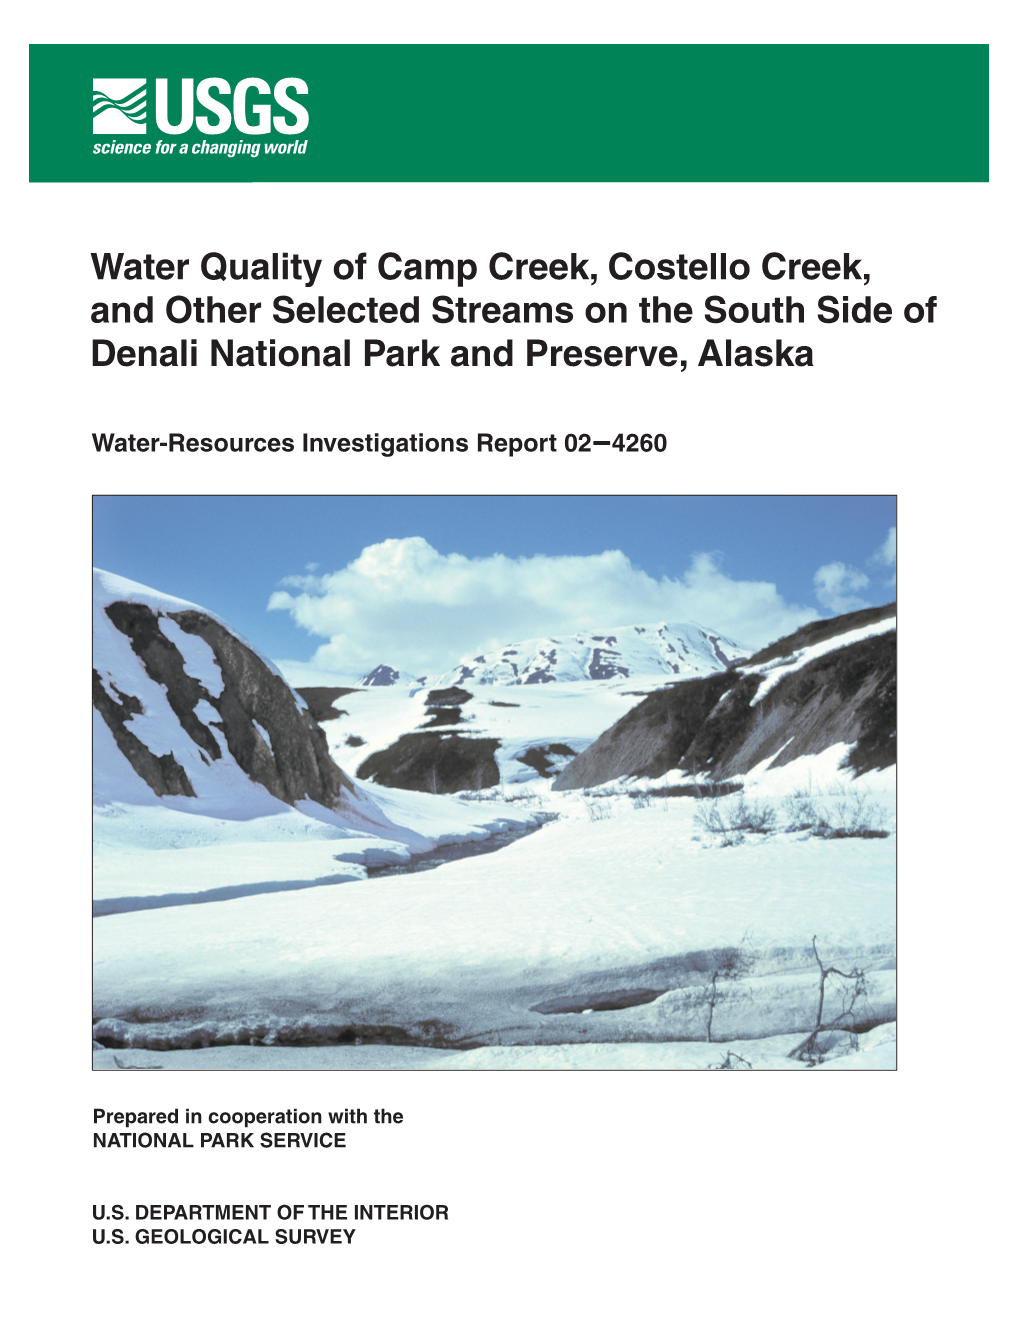 Water Quality of Camp Creek, Costello Creek, and Other Selected Streams on the South Side of Denali National Park and Preserve, Alaska